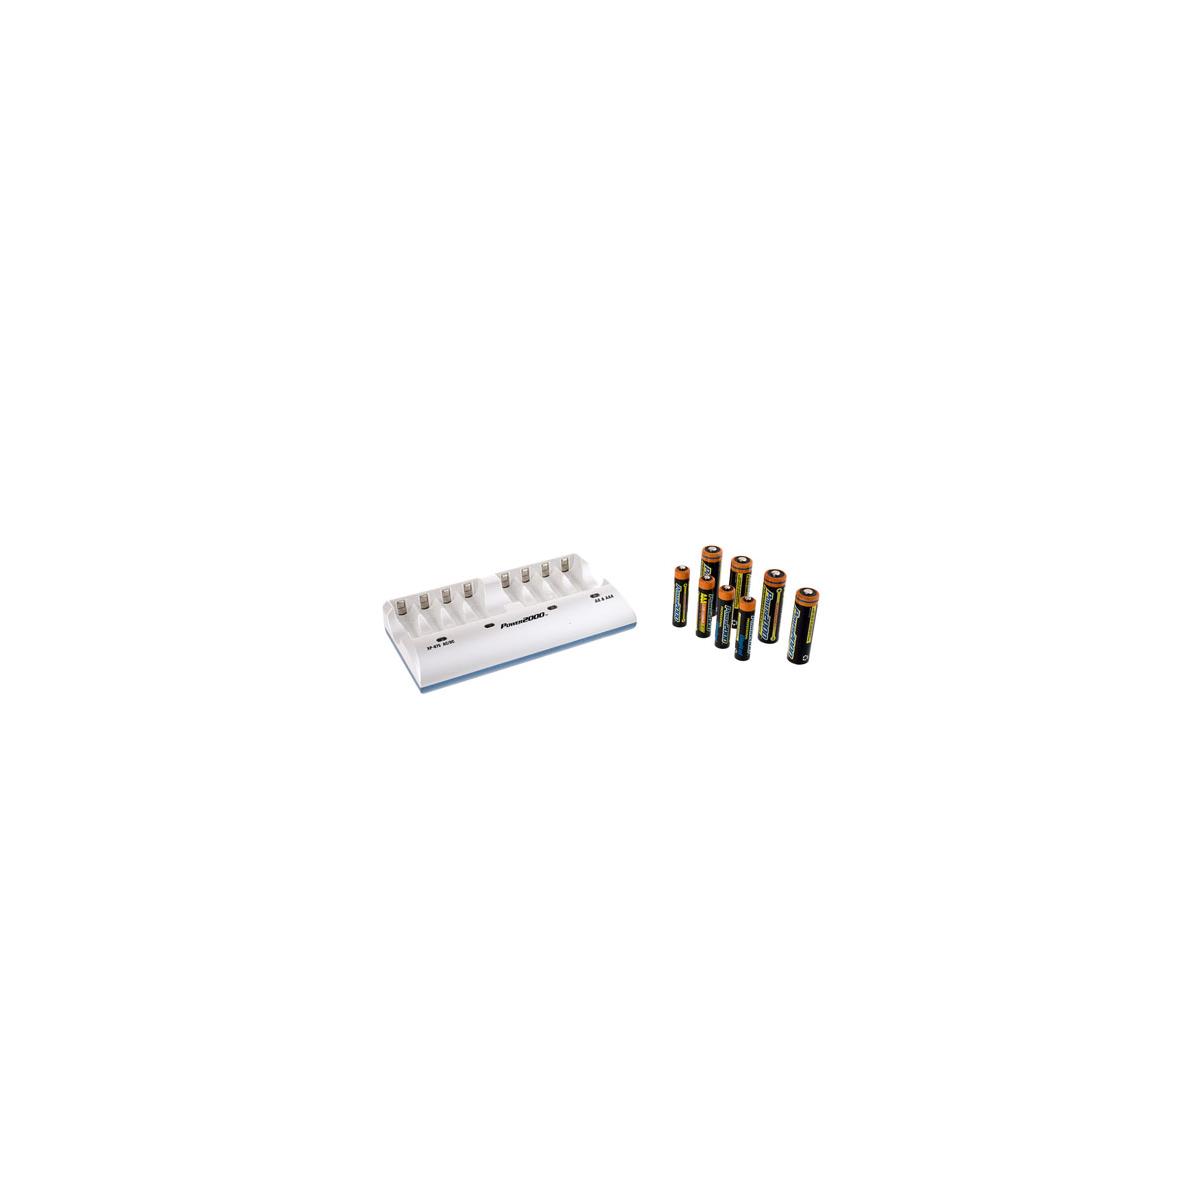 Image of Power2000 XP875 Kit w/4x AA 2700mAh and 4x AAA 1000mAh NiMH Batteries &amp; Charger